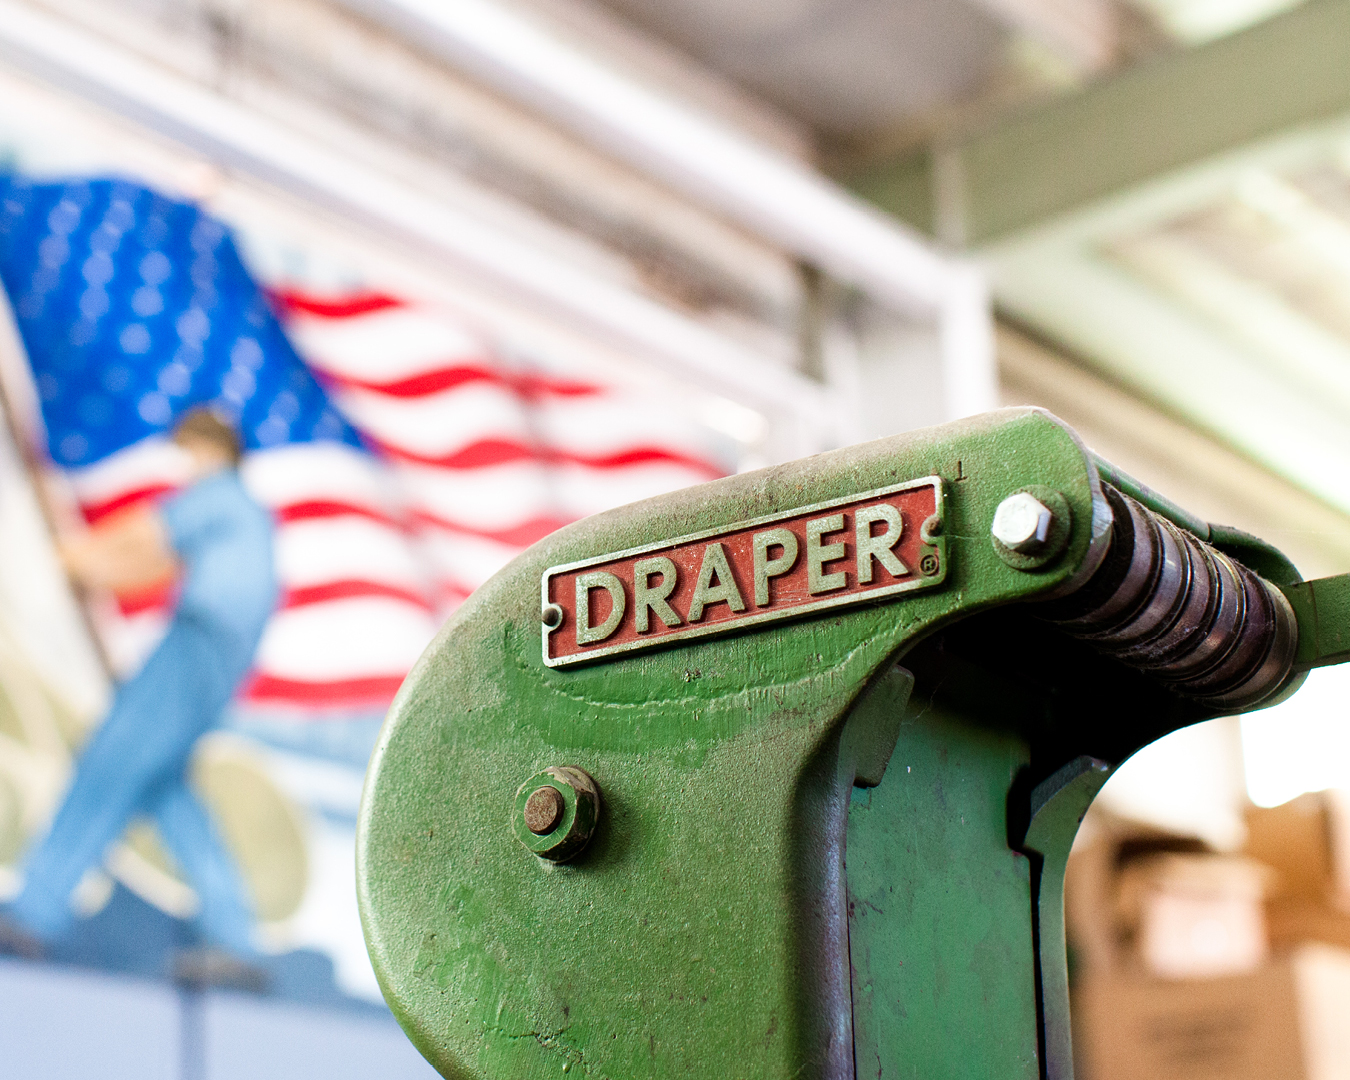 photograph-red-and-gold-industrial-nameplate-Draper-on-green-loom-american-flag-mural-in-background